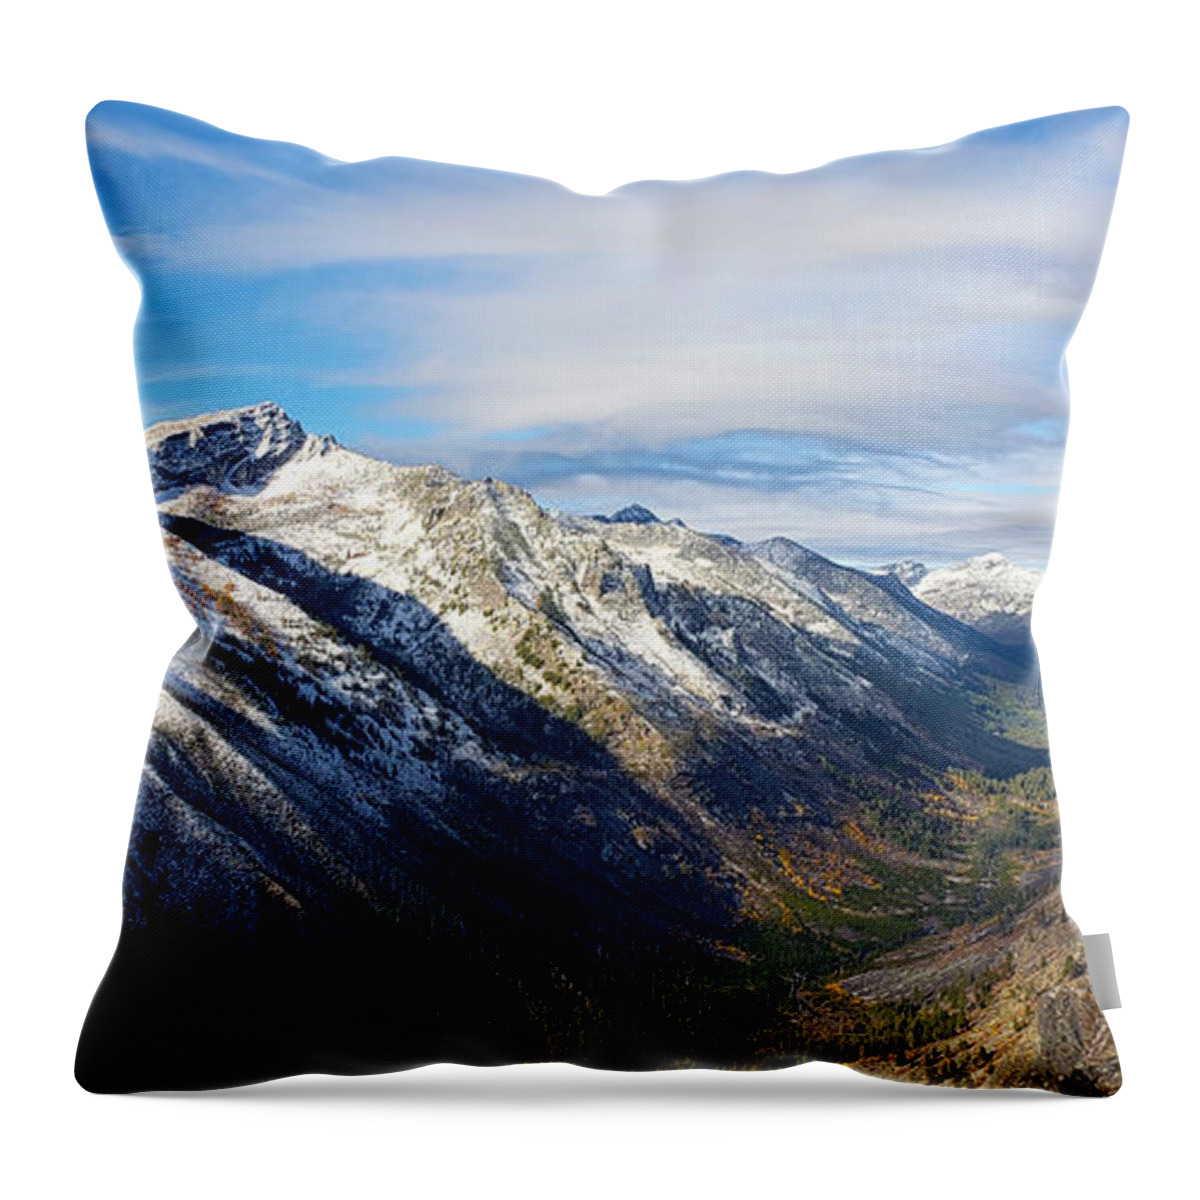 Bitterroot Valley Throw Pillow featuring the photograph Bitterroot Valley by Dillon Wright